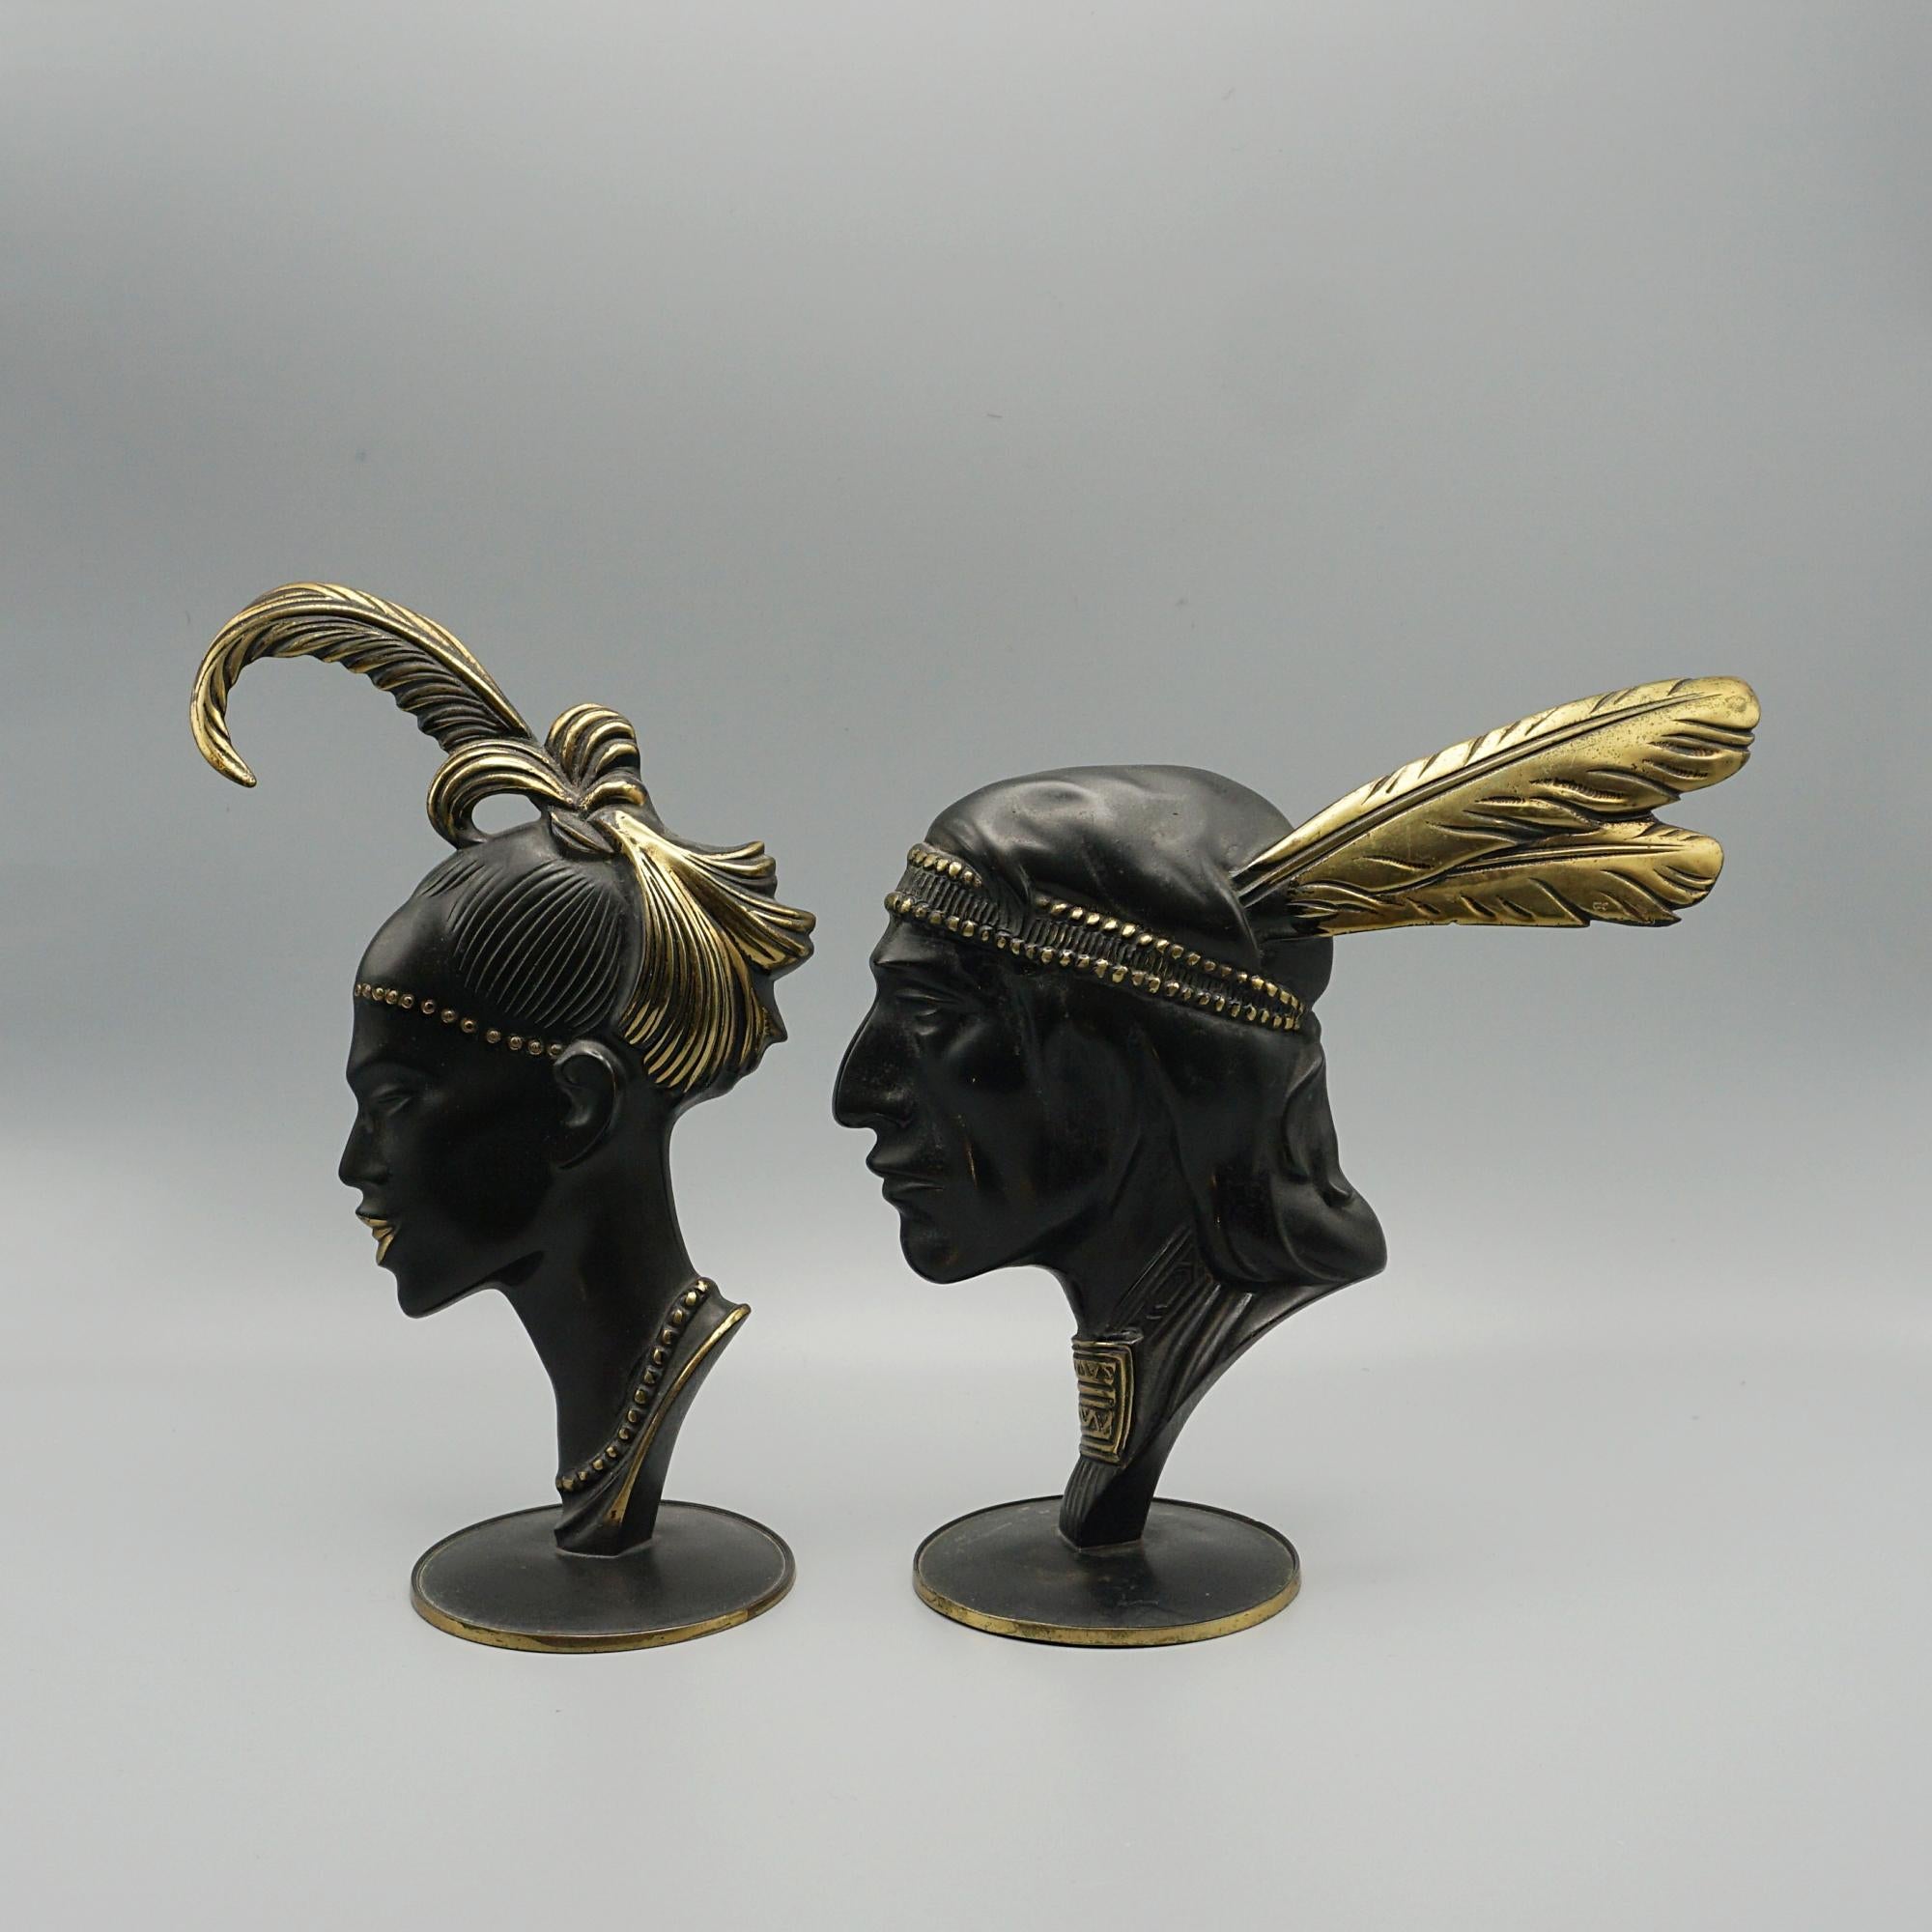 A pair of Native American busts. Solid bronze. Stamped Fabrica Patria to underside. 

Dimensions: Male: H 18cm W 18cm D 18cm Female: H 20cm W 13cm

Origin: French

Date: Circa 1940

Item Number: 1903344